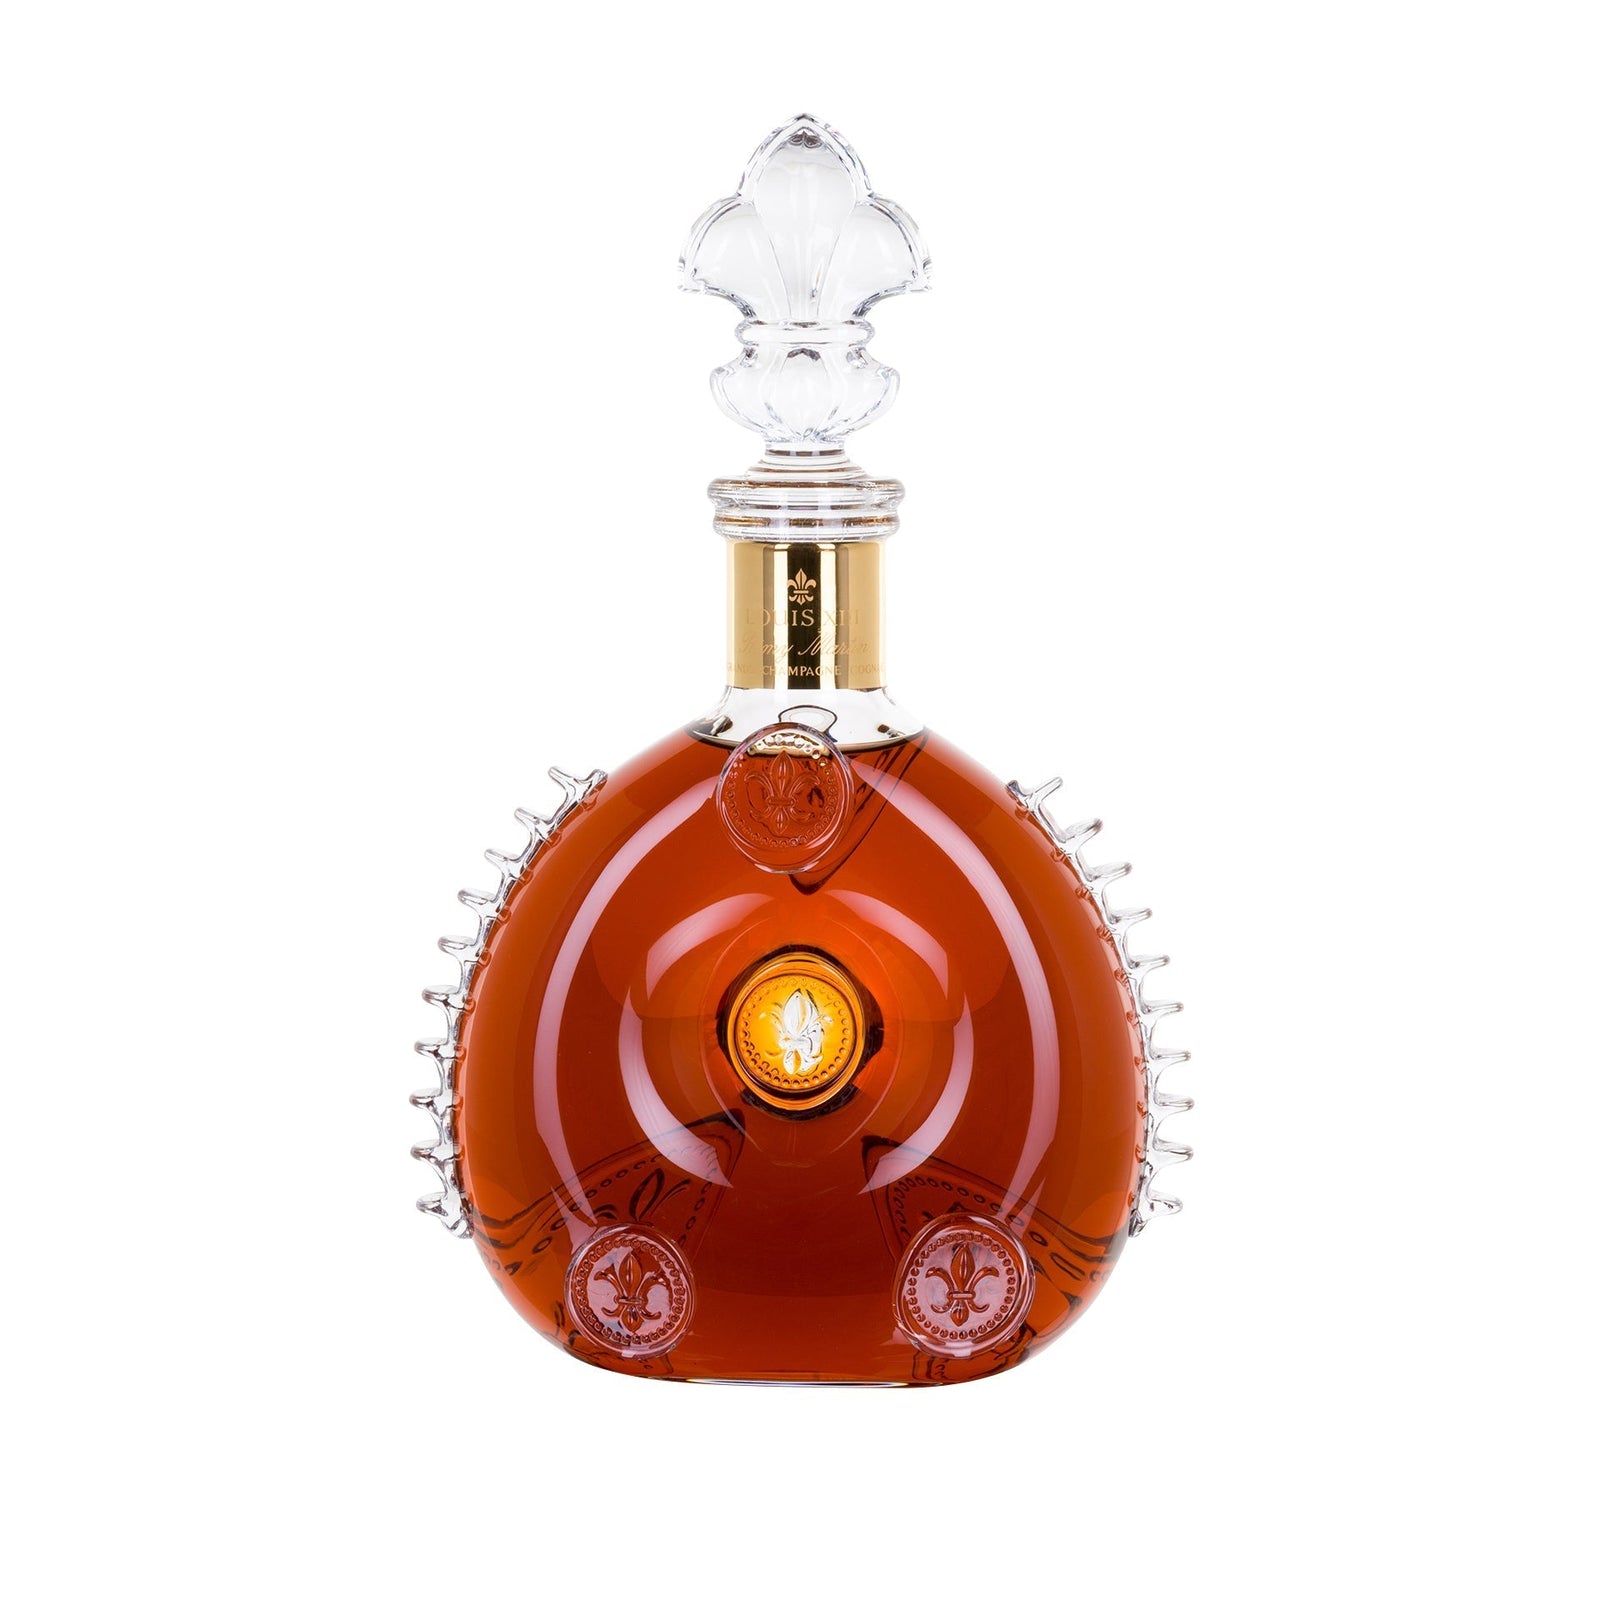 A packshot of LOUIS XIII Magnum decanter on a white background